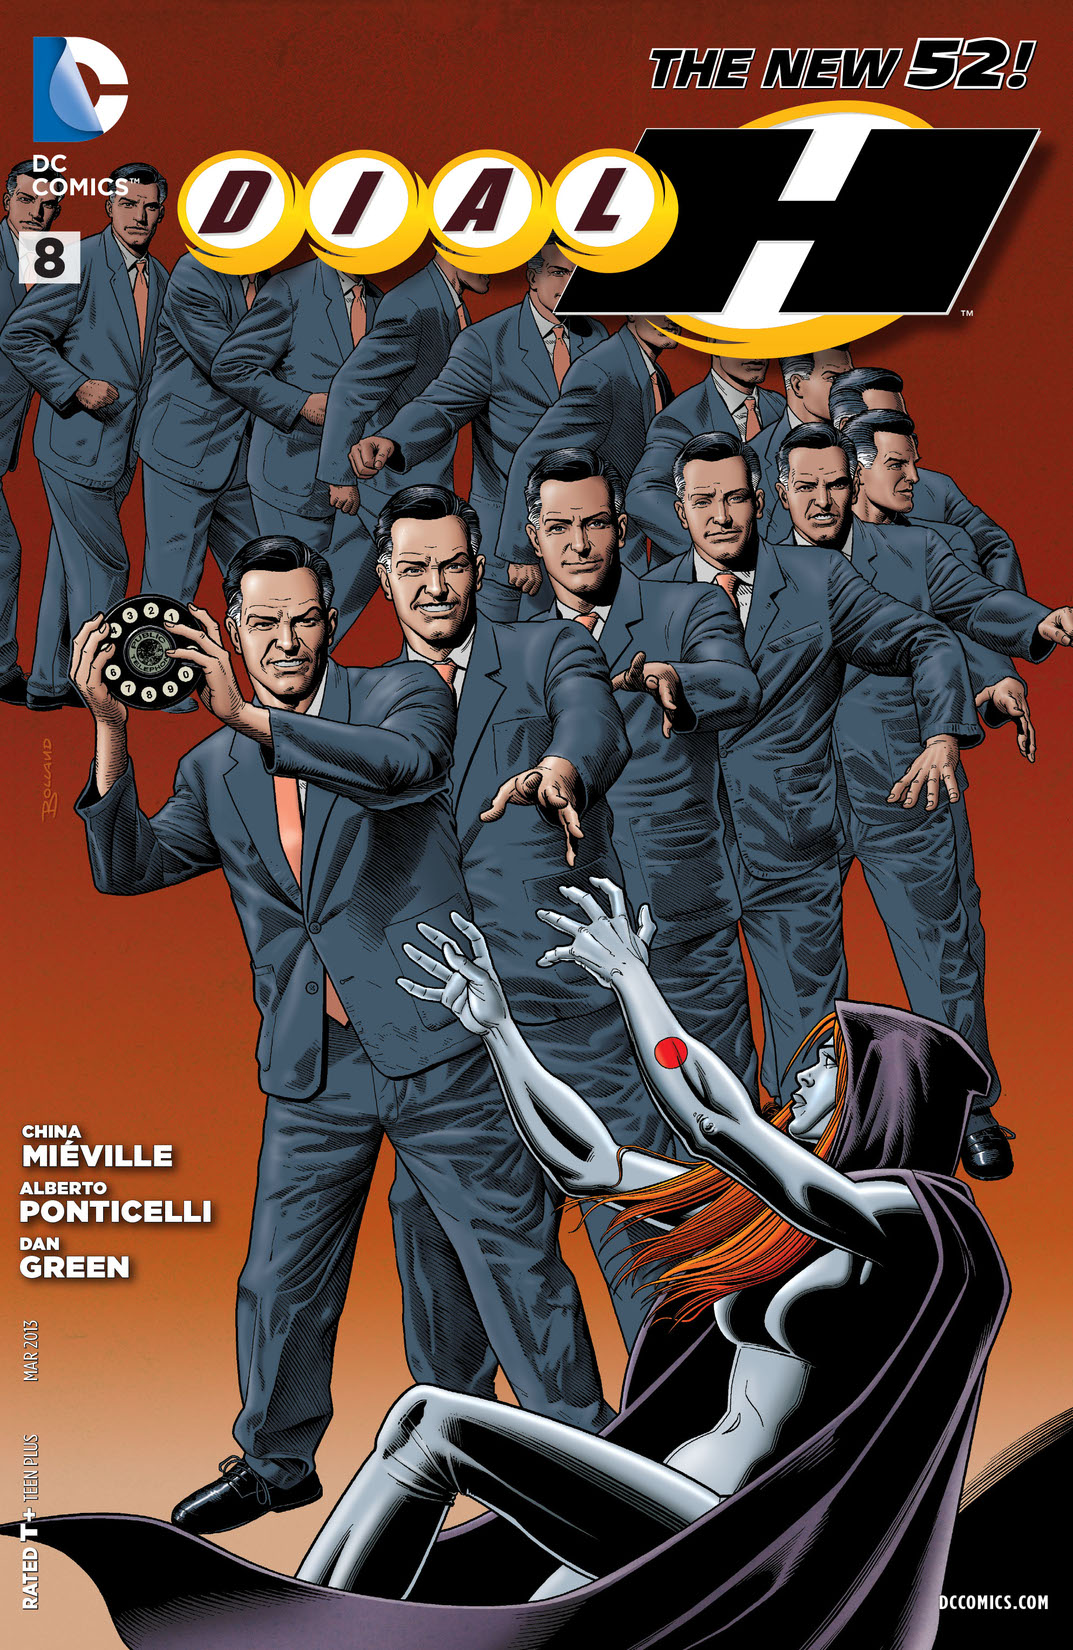 Dial H (2012-) #8 preview images